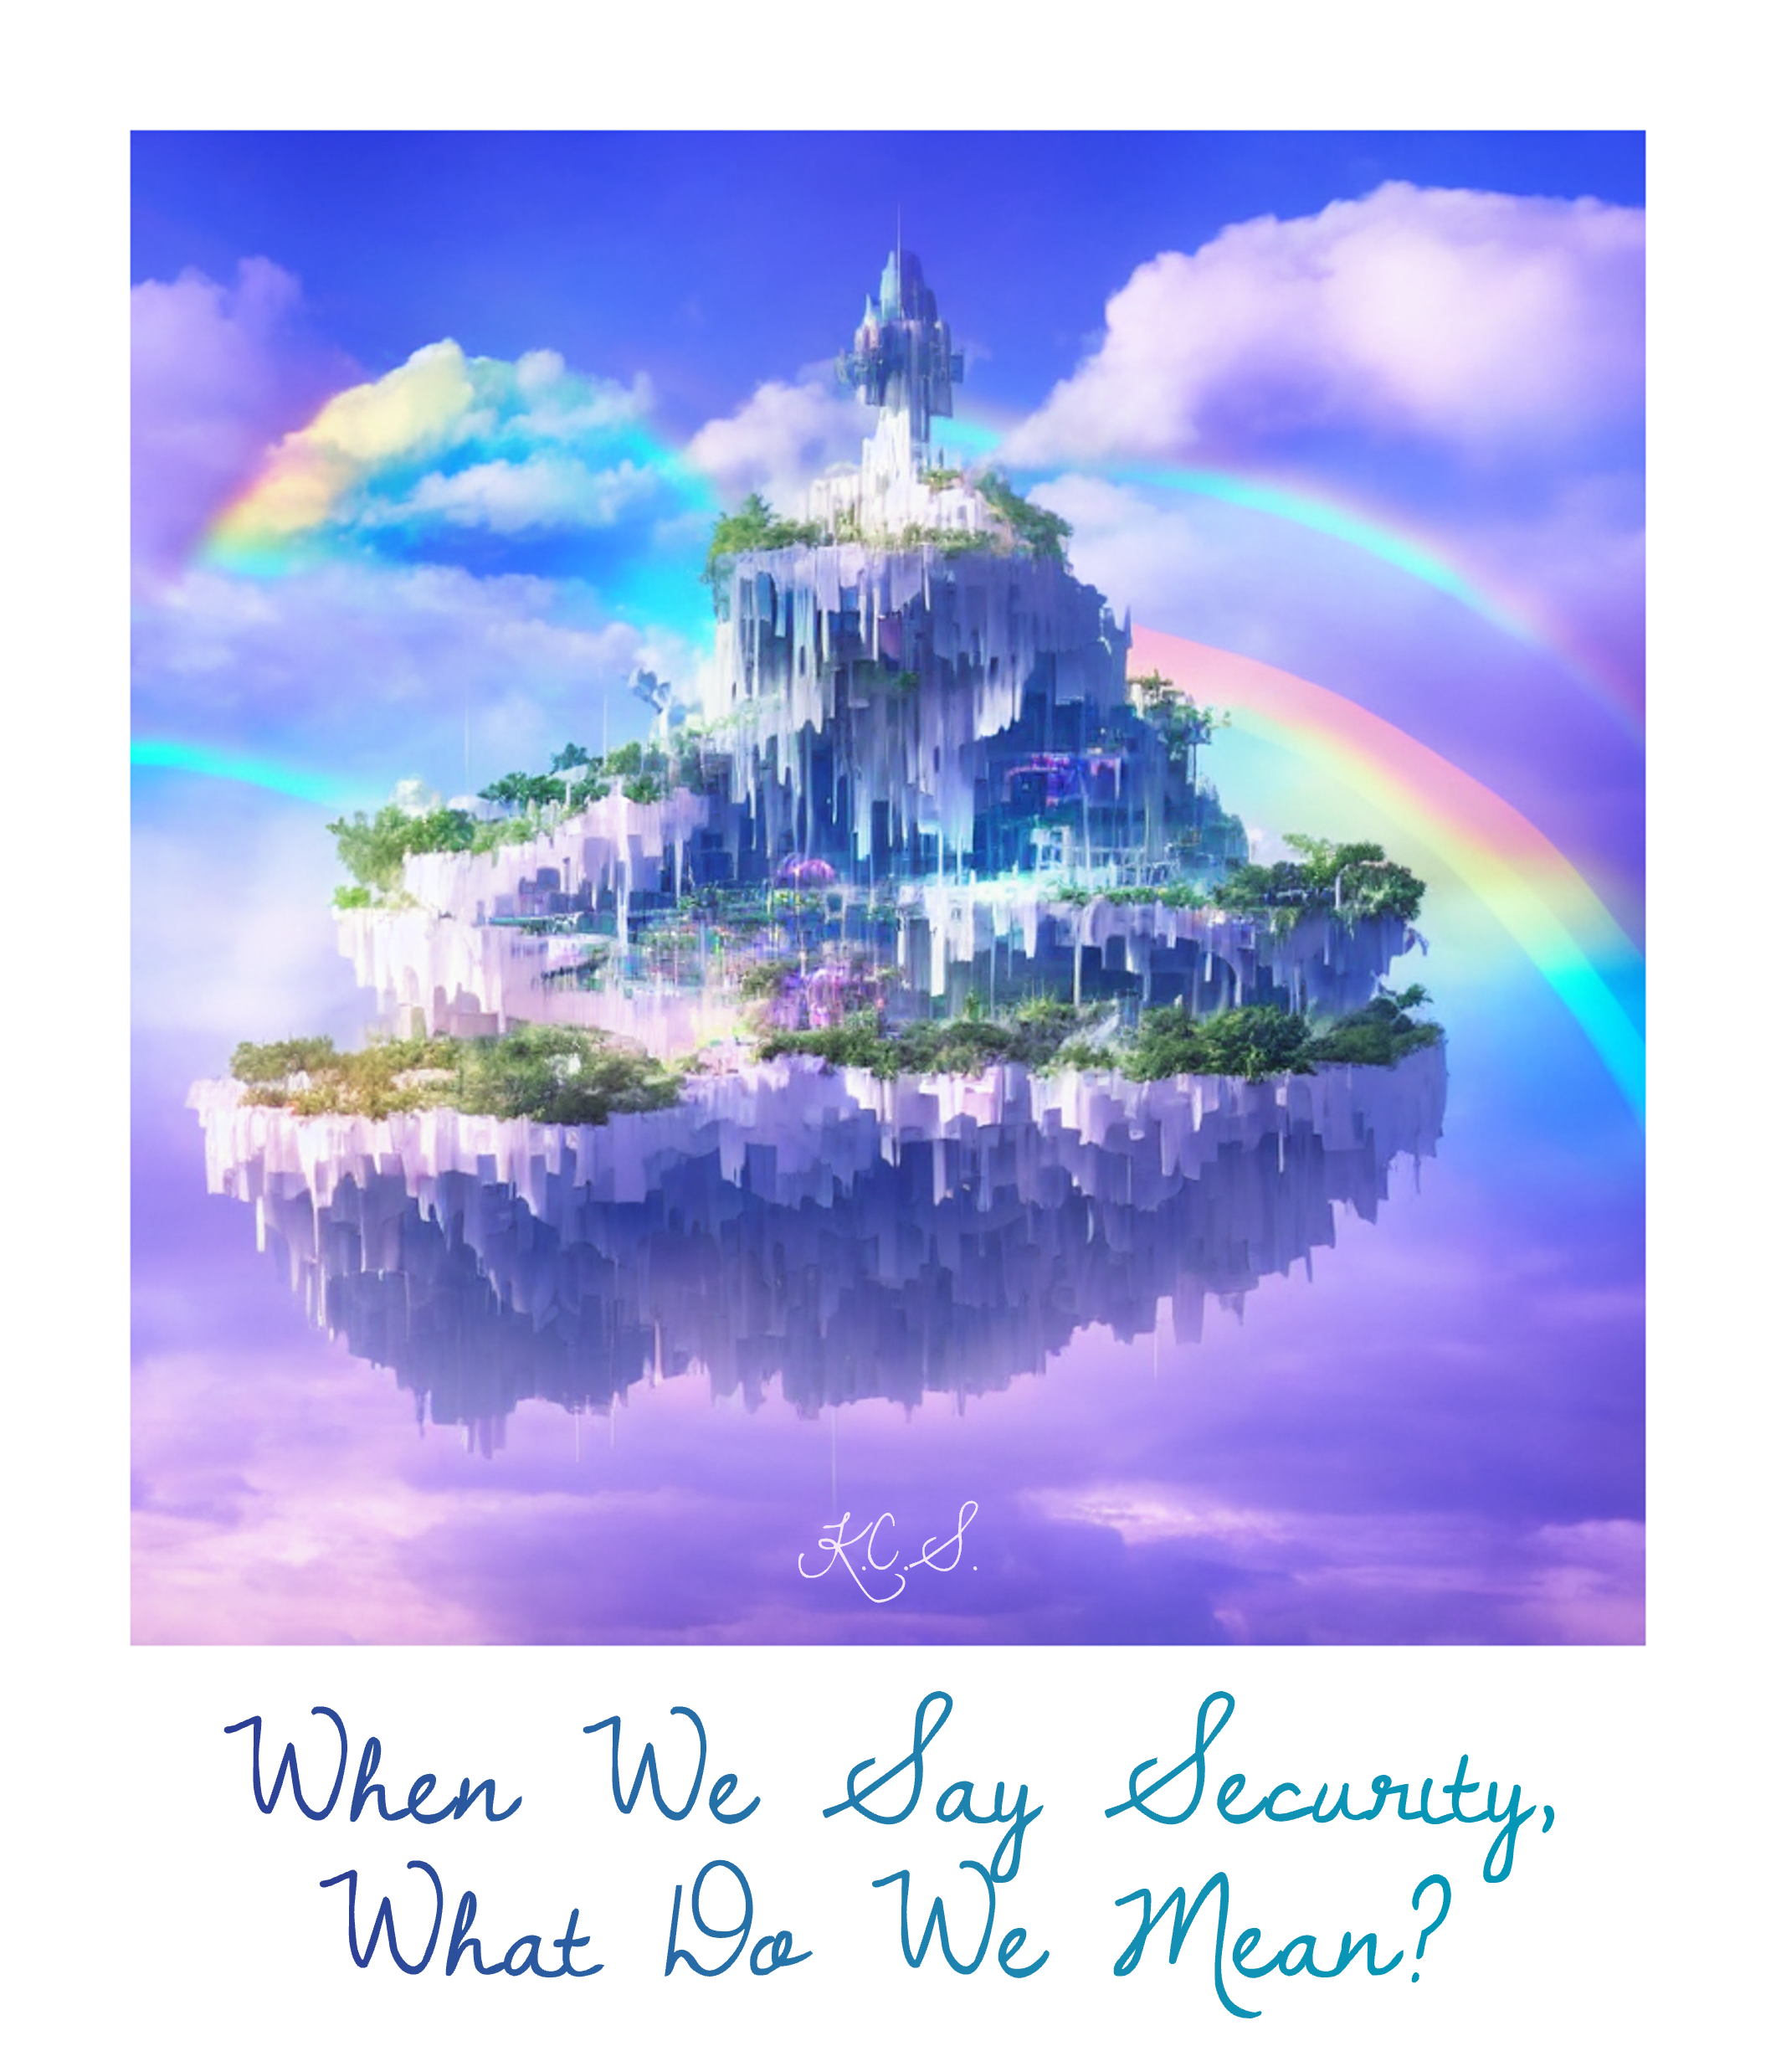 The cover art for the album with the title: What do we mean when we say security? It depicts an island floating in a sky filled with rainbow and pastel clouds in shades of periwinkle and violet. The island itself is a paradise, a blend of fantasy and cyberpunk aesthetics. Lush trees blanket its ledges while waterfalls cascade from each ledge, frozen in time and resembling a beautiful digital glitch. It is meant to reflect the utopia we might achieve with our systems &ndash; our own islands &ndash; if we embraced the original meanings of the word security.